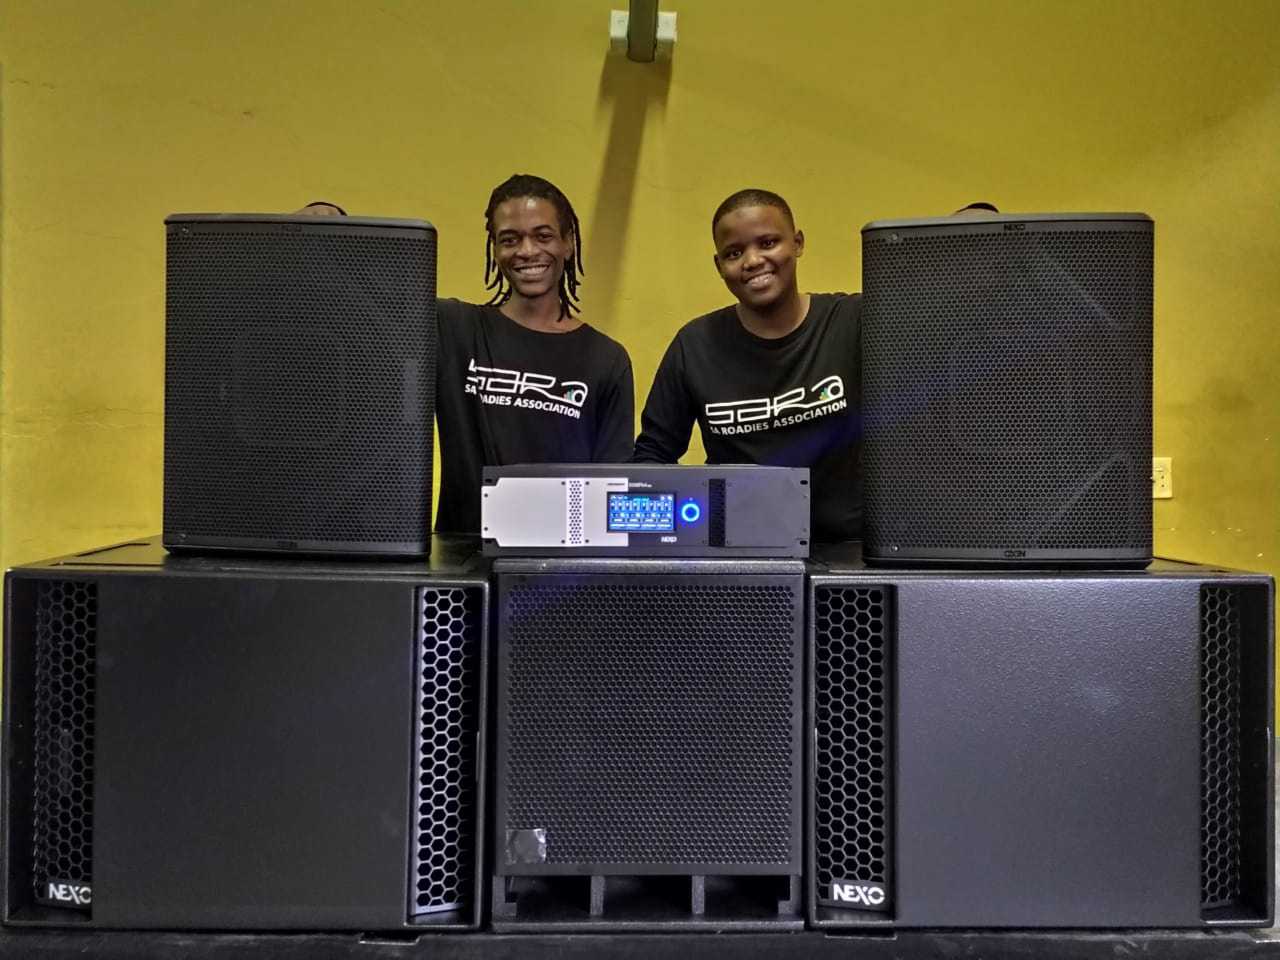 The sound system equipment received will enhance SARA’s training programmes